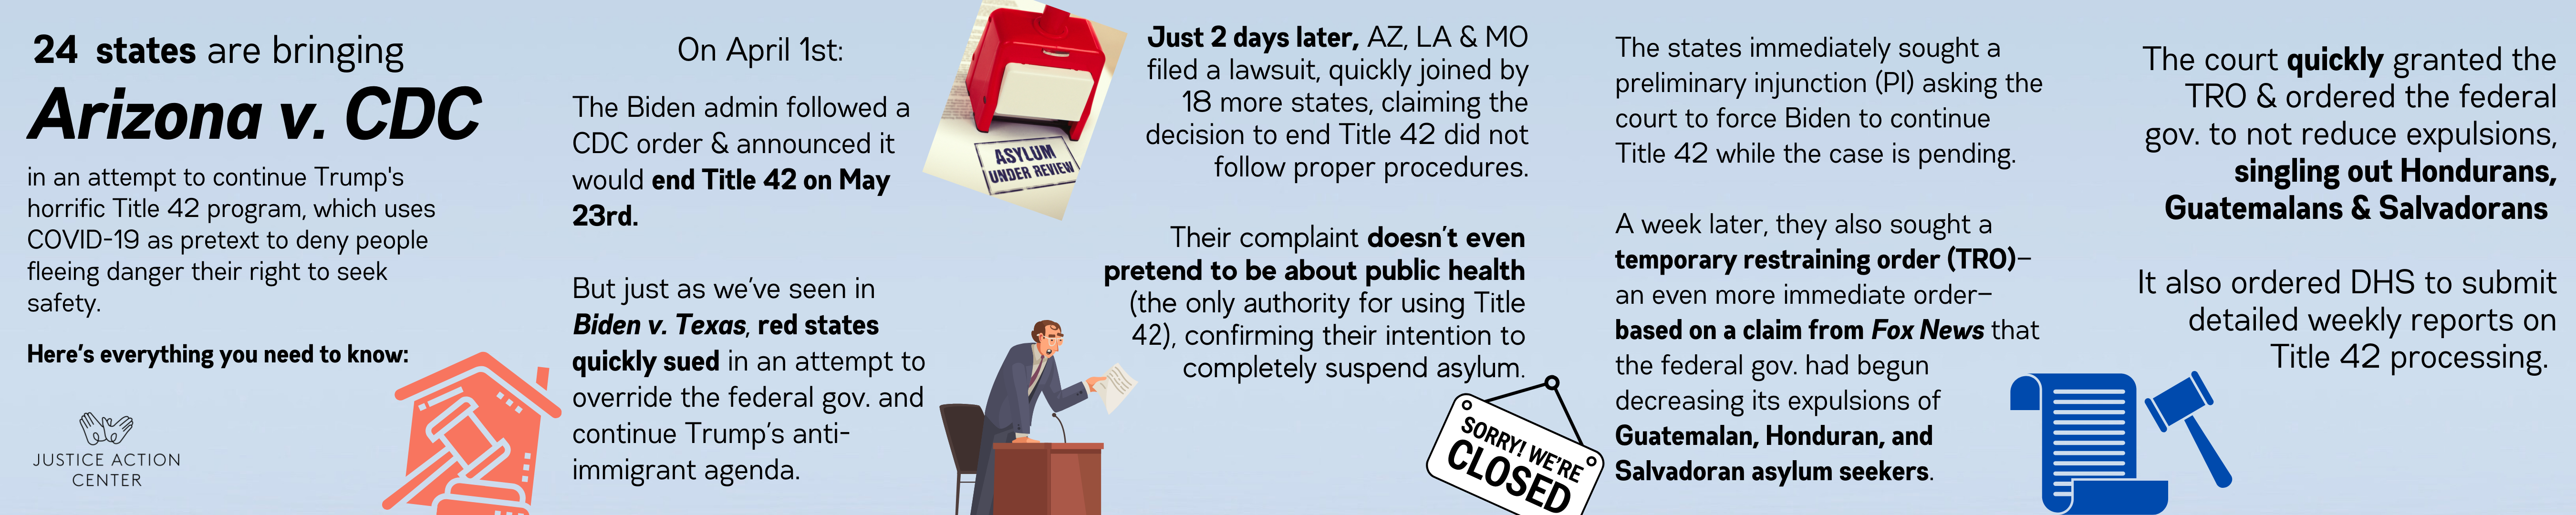 Long horizontal blue graphic describing the case brought by 24 states challenging the CDC's order terminating Title 42 on May 23rd. 